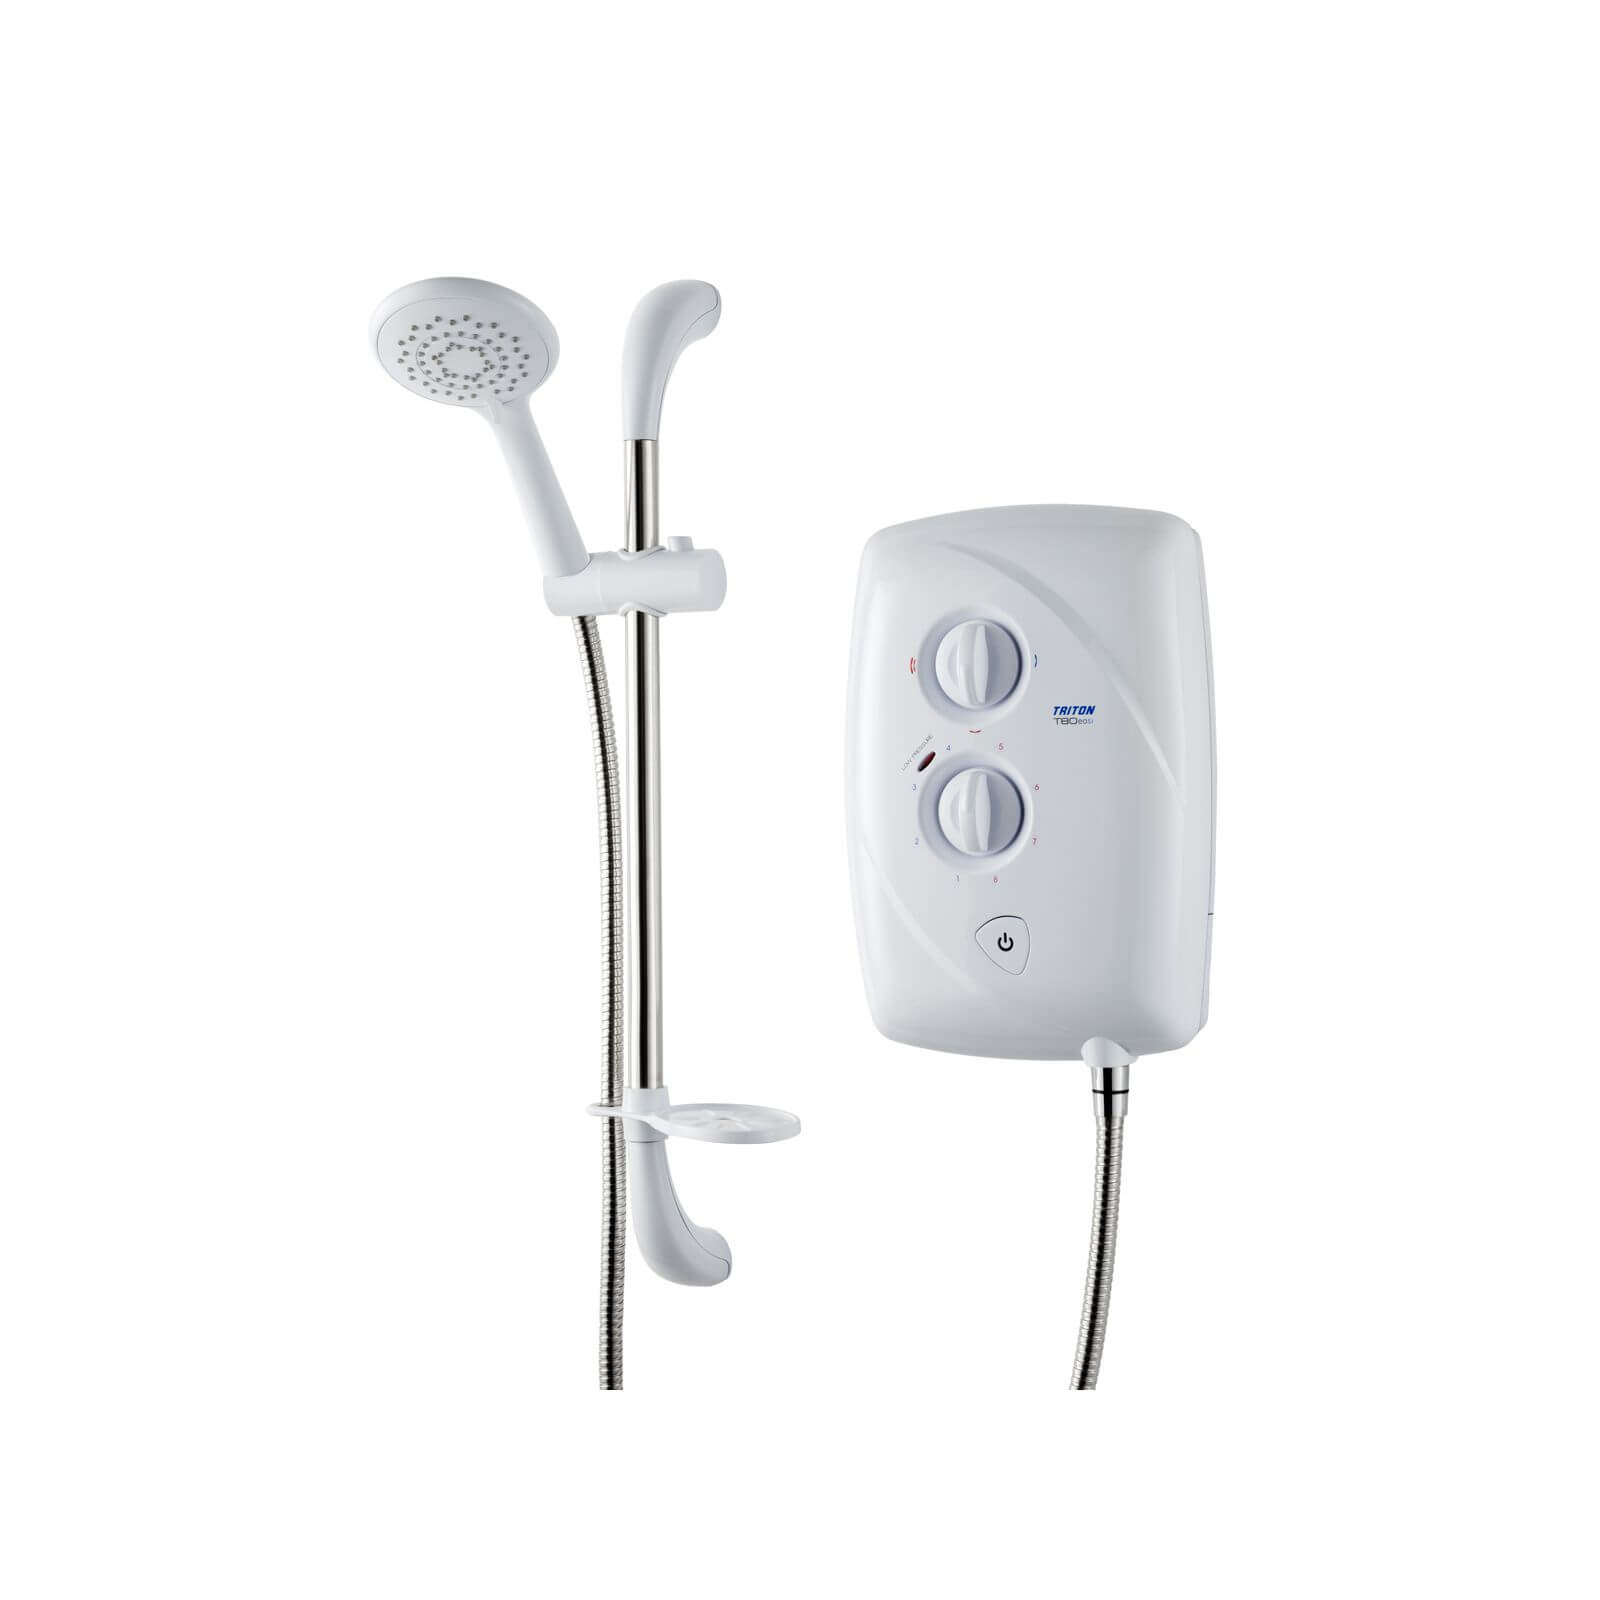 Photo of Triton T80easi-fit 8.5kw Electric Shower - White